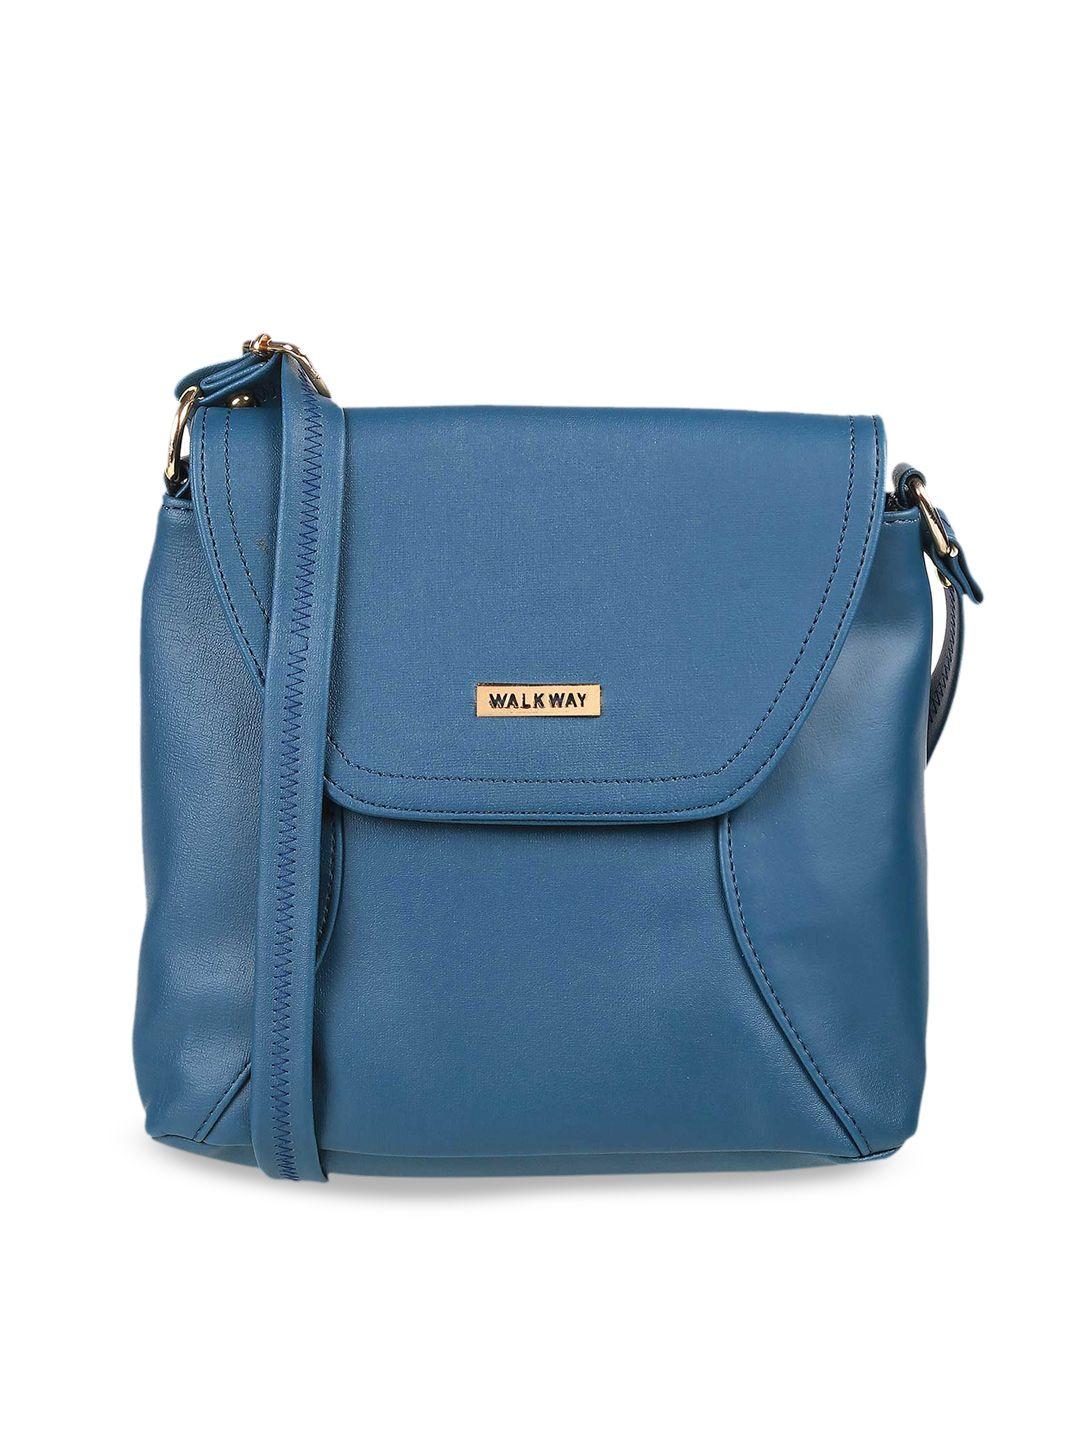 walkway by metro blue structured sling bag